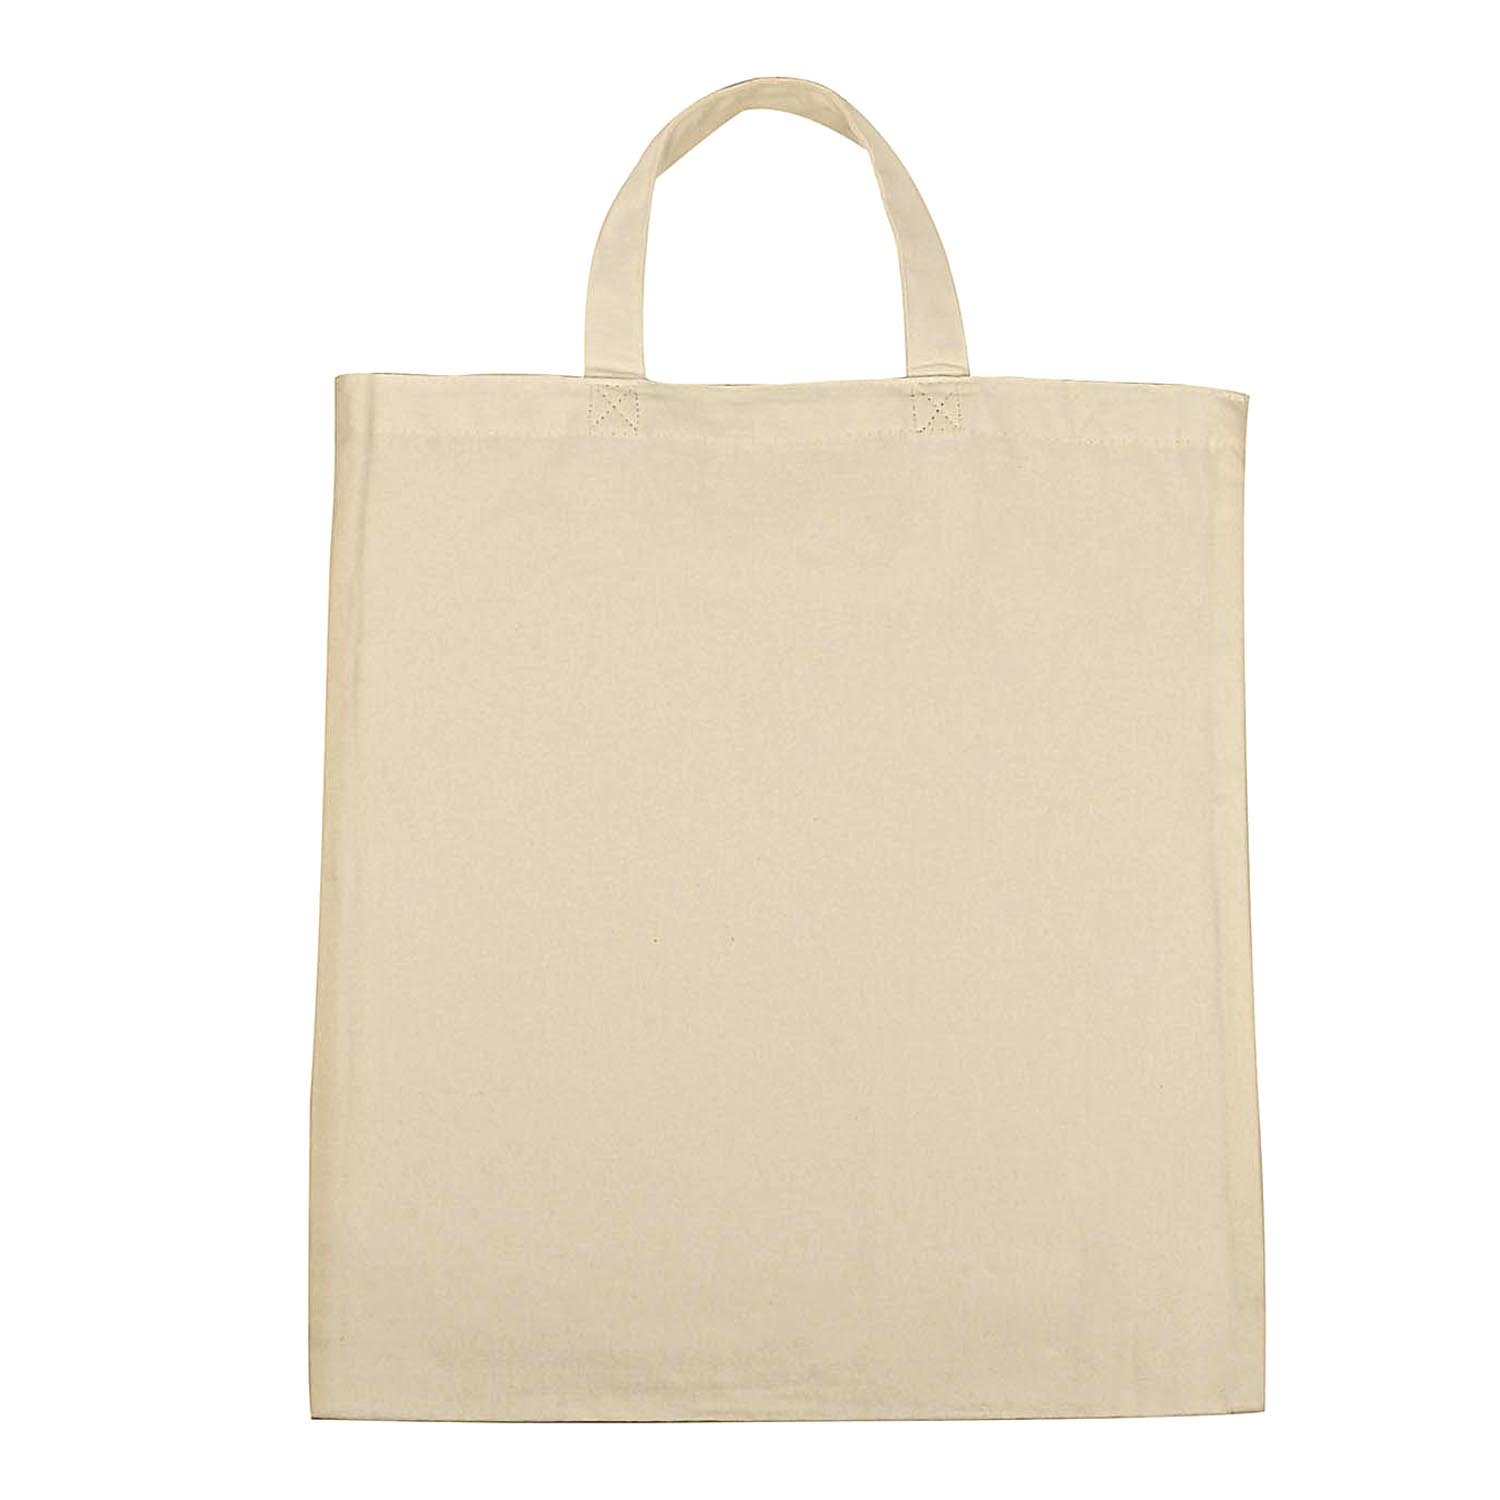 Why Your Business Should Invest in Plastic Shopping Bags